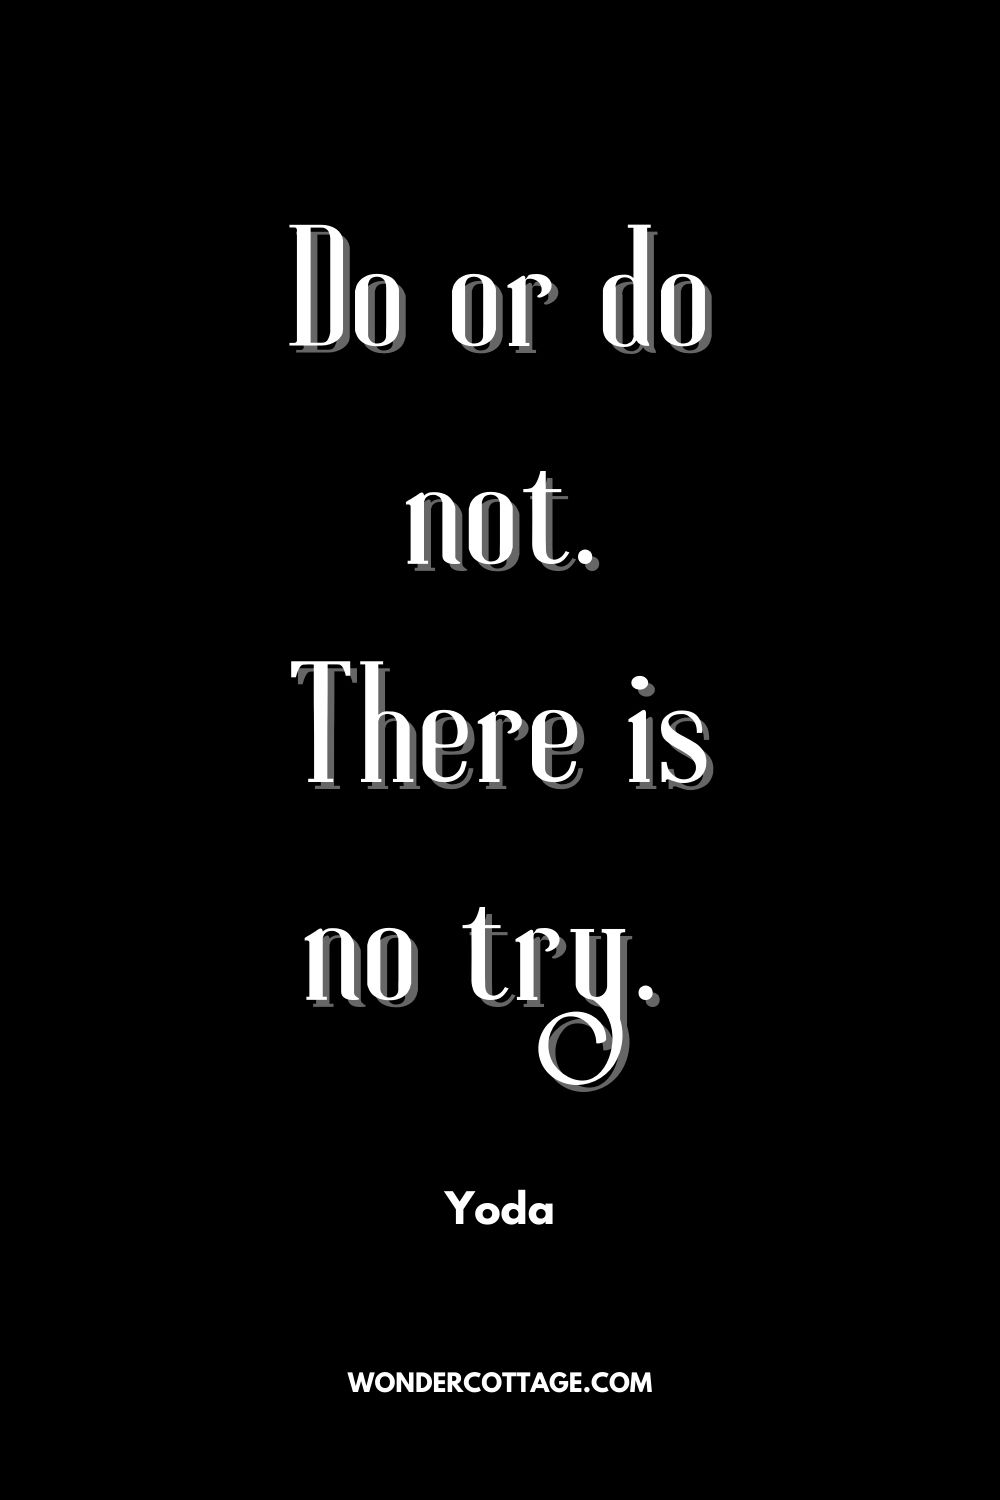 Do or do not. There is no try. 
Yoda